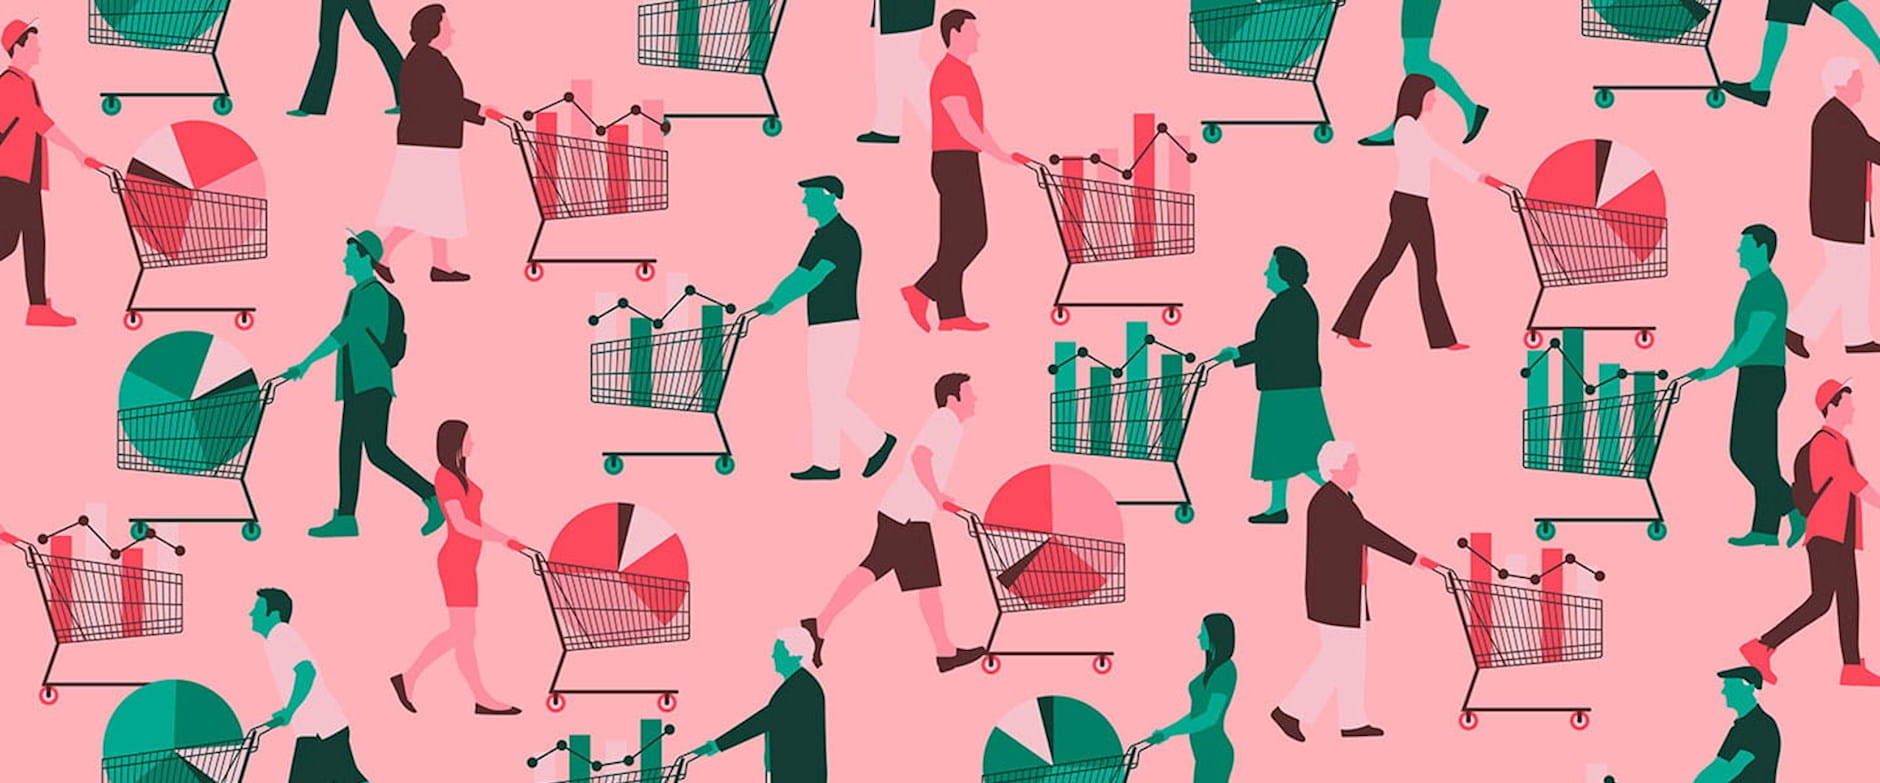 People with Shopping Carts filled with Data Charts